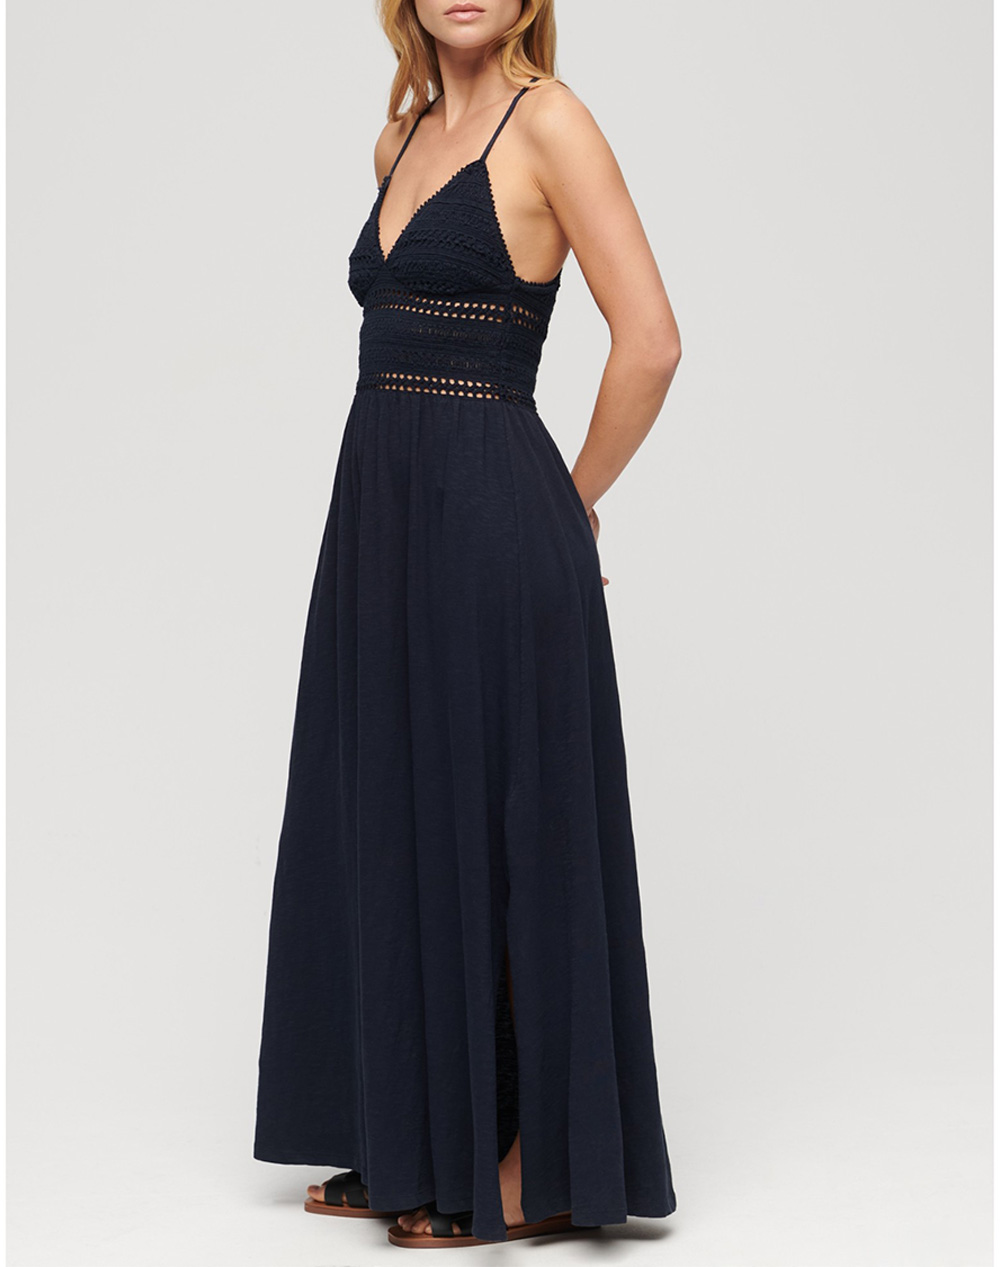 SUPERDRY D3 OVIN JERSEY LACE MAXI DRESS ΦΟΡΕΜΑ ΓΥΝΑΙΚΕΙΟ W8011637A-98T DarkBlue 3810ASUPE4200073_XR01739